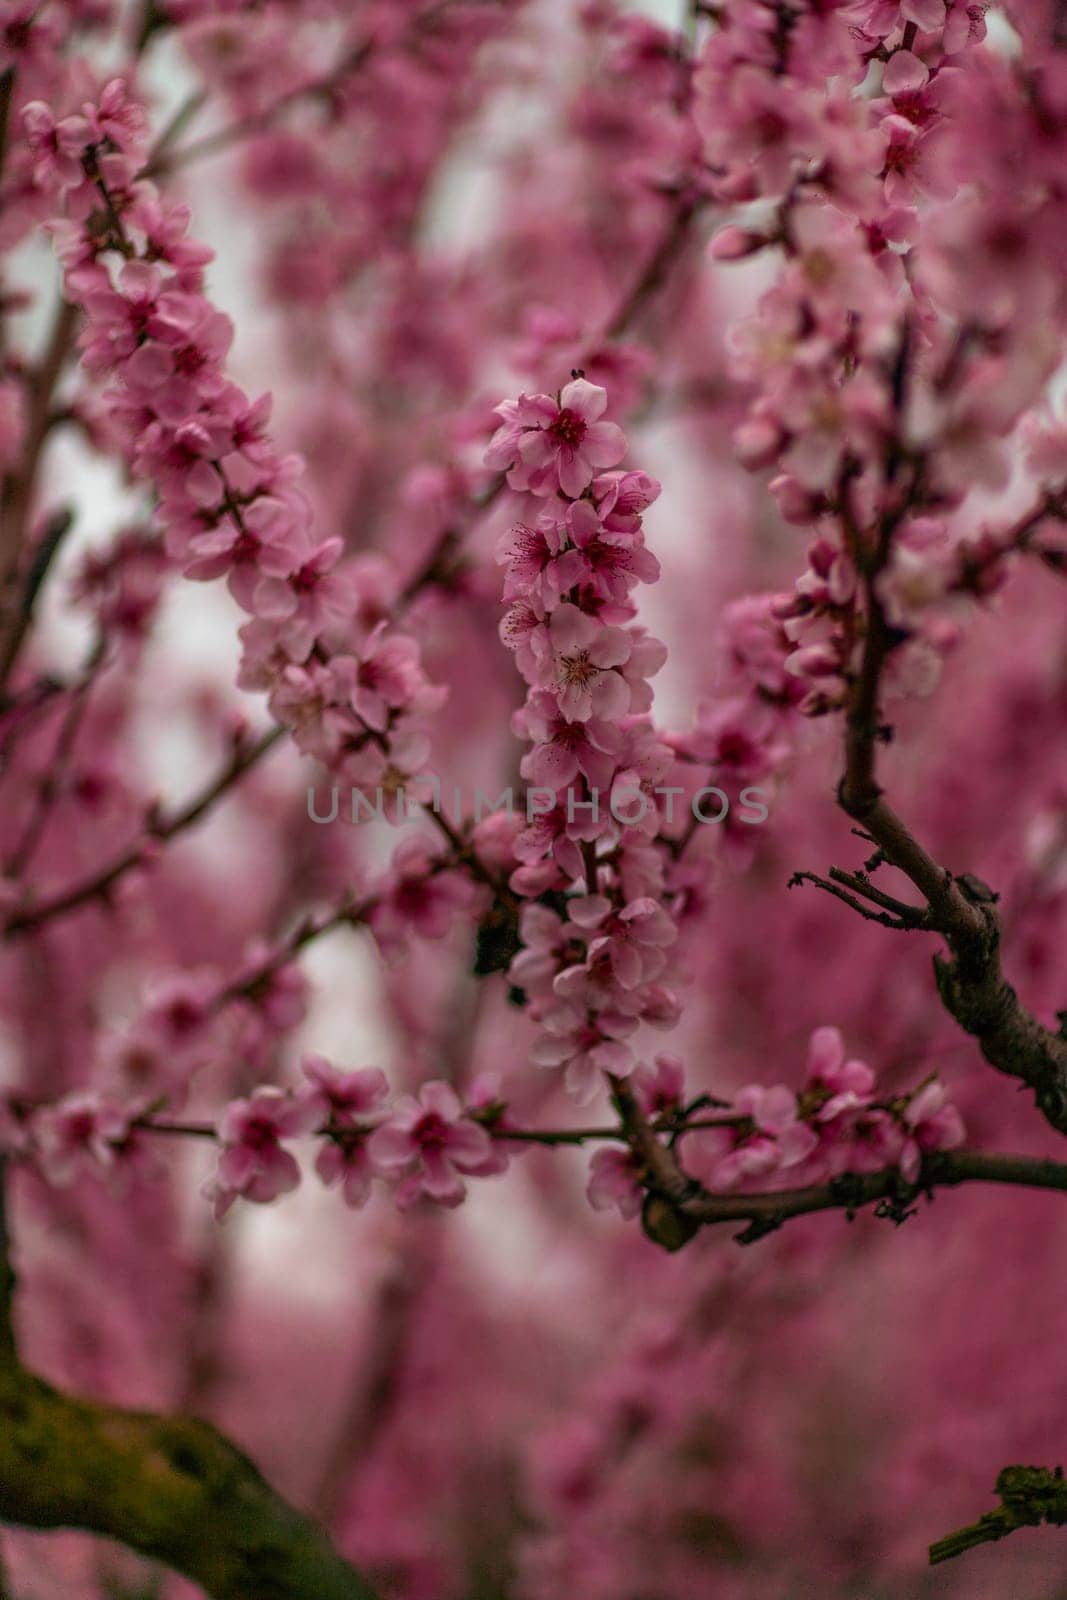 A peach blooms in the spring garden. Beautiful bright pale pink background. A flowering tree branch in selective focus. A dreamy romantic image of spring. Atmospheric natural background.